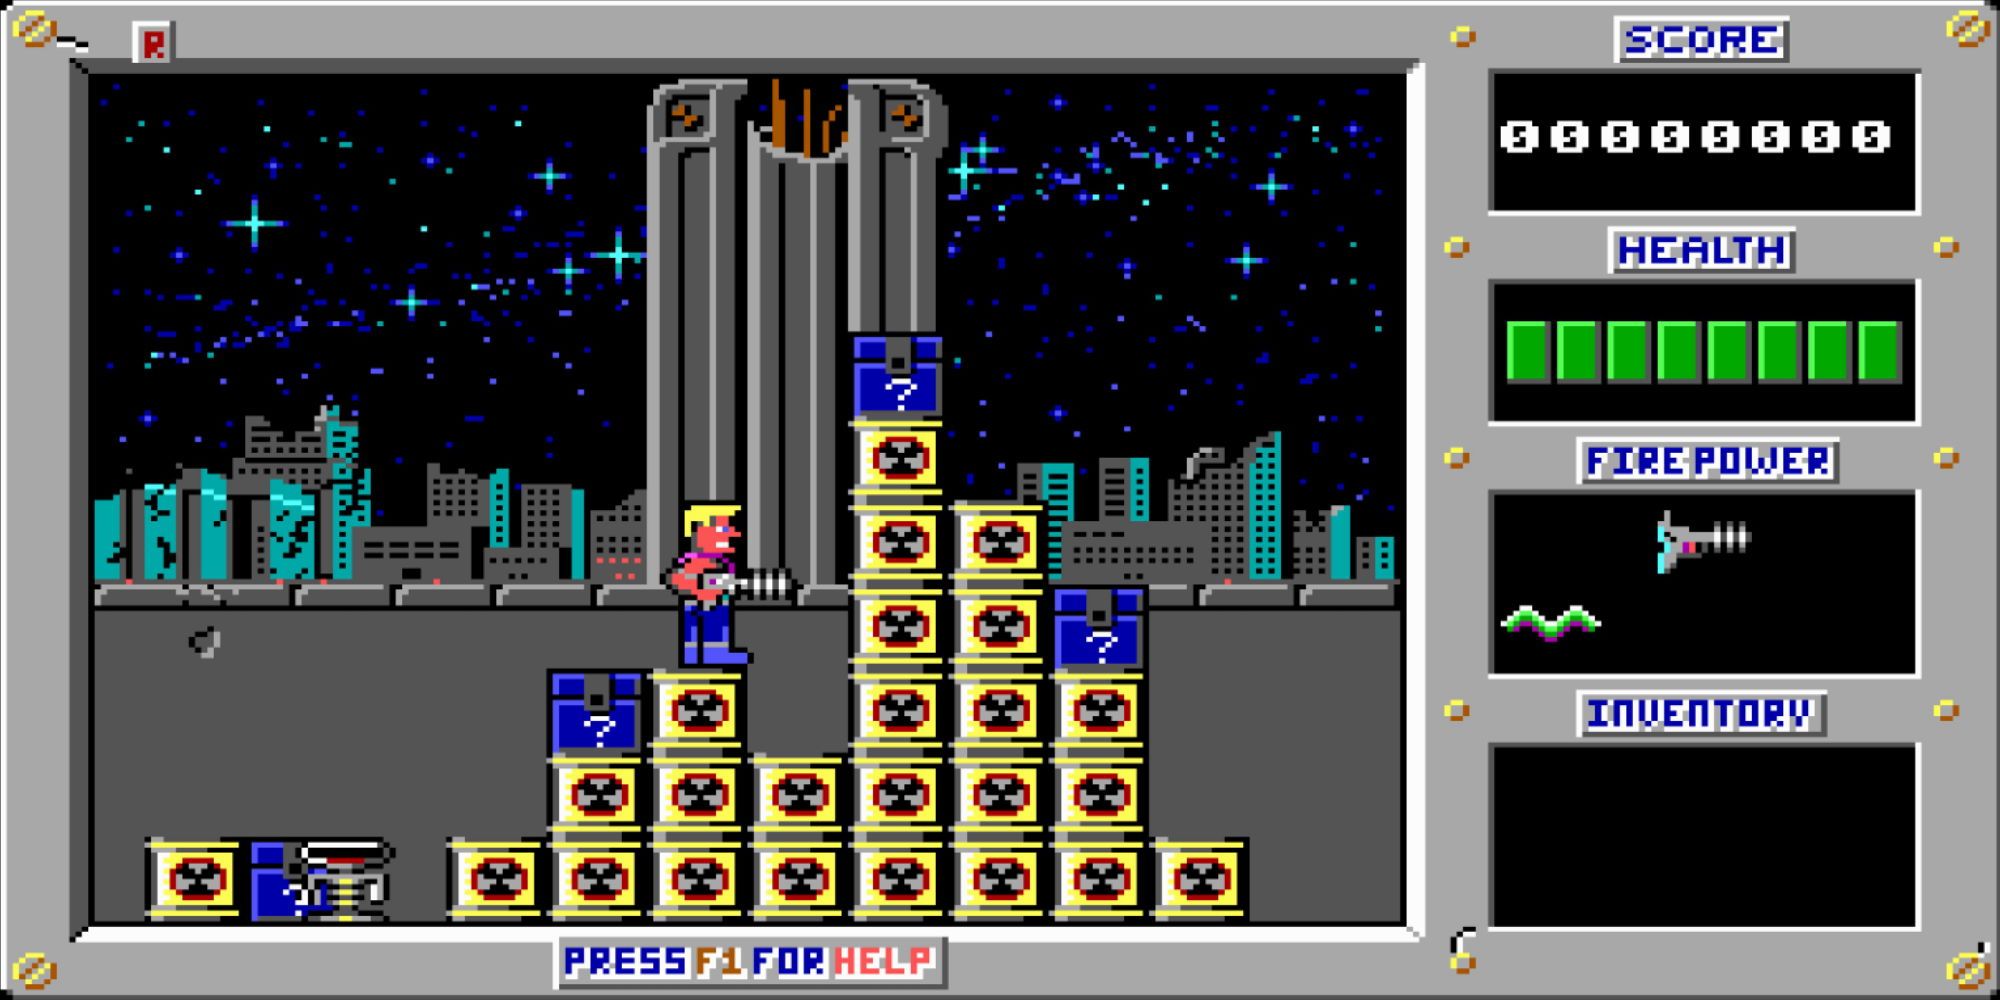 Duke Nukem standing on a pile of radioactive barrels and near some boxes in a futuristic setting